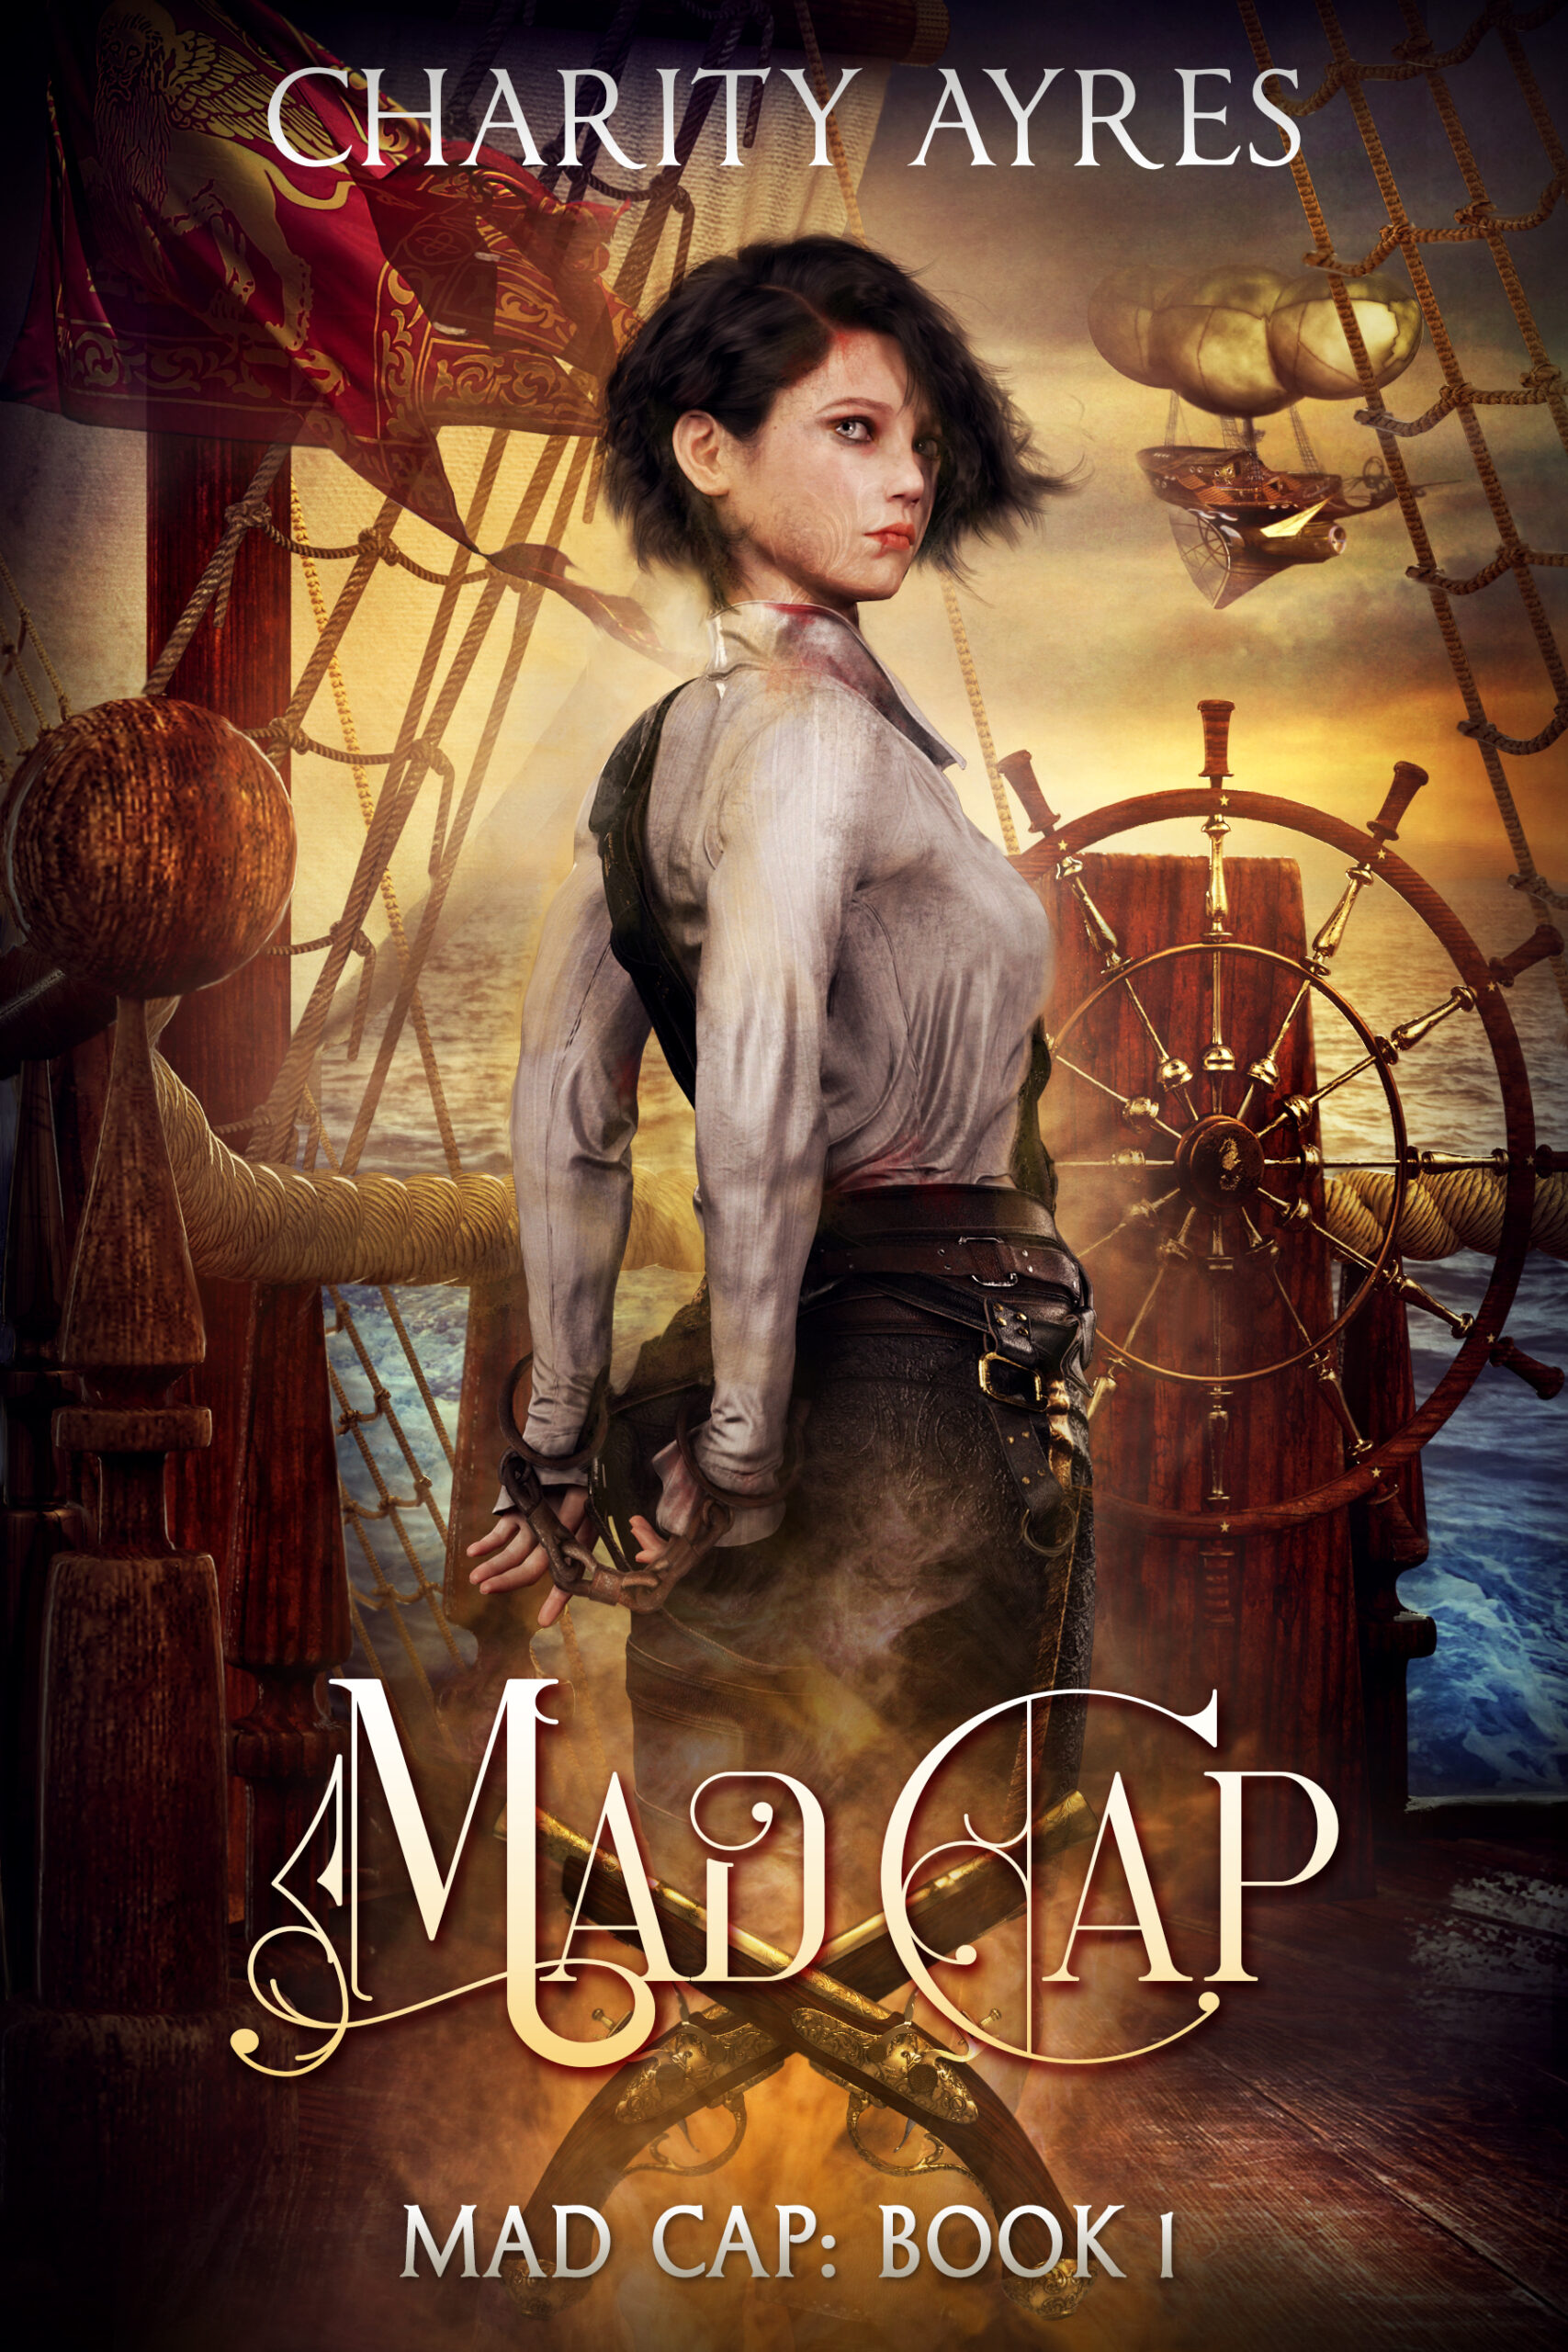 Need a light-hearted fix of comedy and adventure to wrap up what’s left of 2020? Check out the latest from Charity Ayres. Maggie and the Madcap are waiting for you!